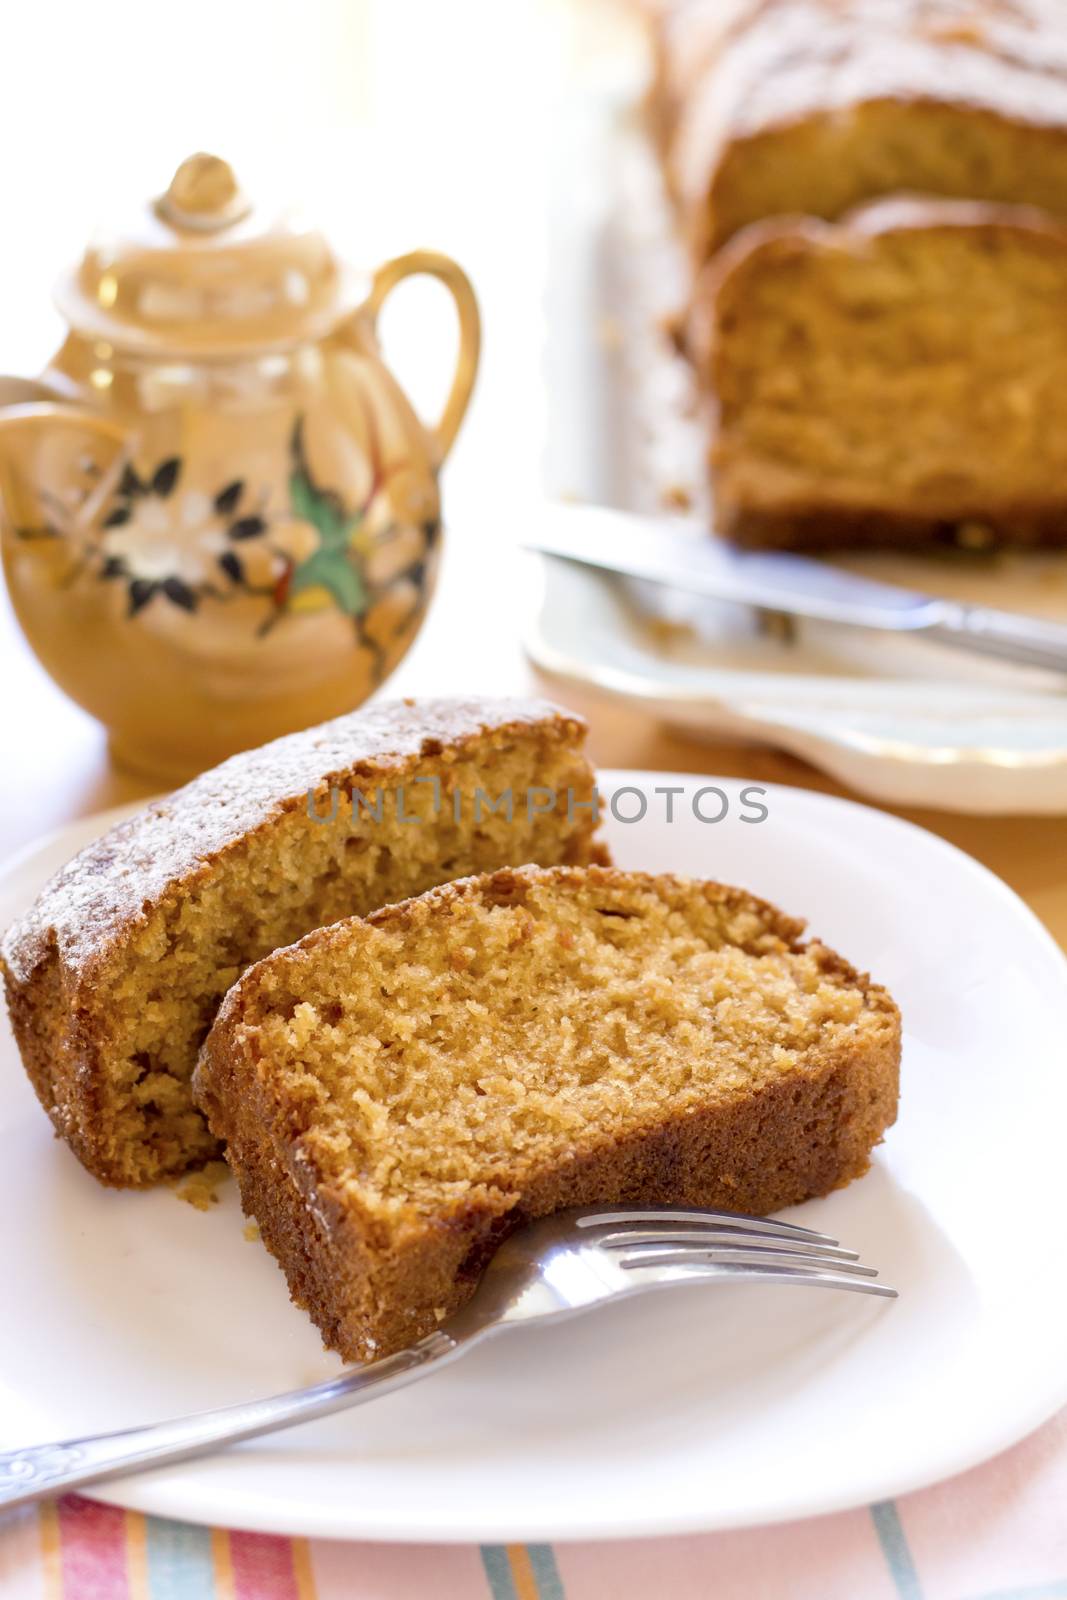 sweet almond homemade cake on white plate with coffee